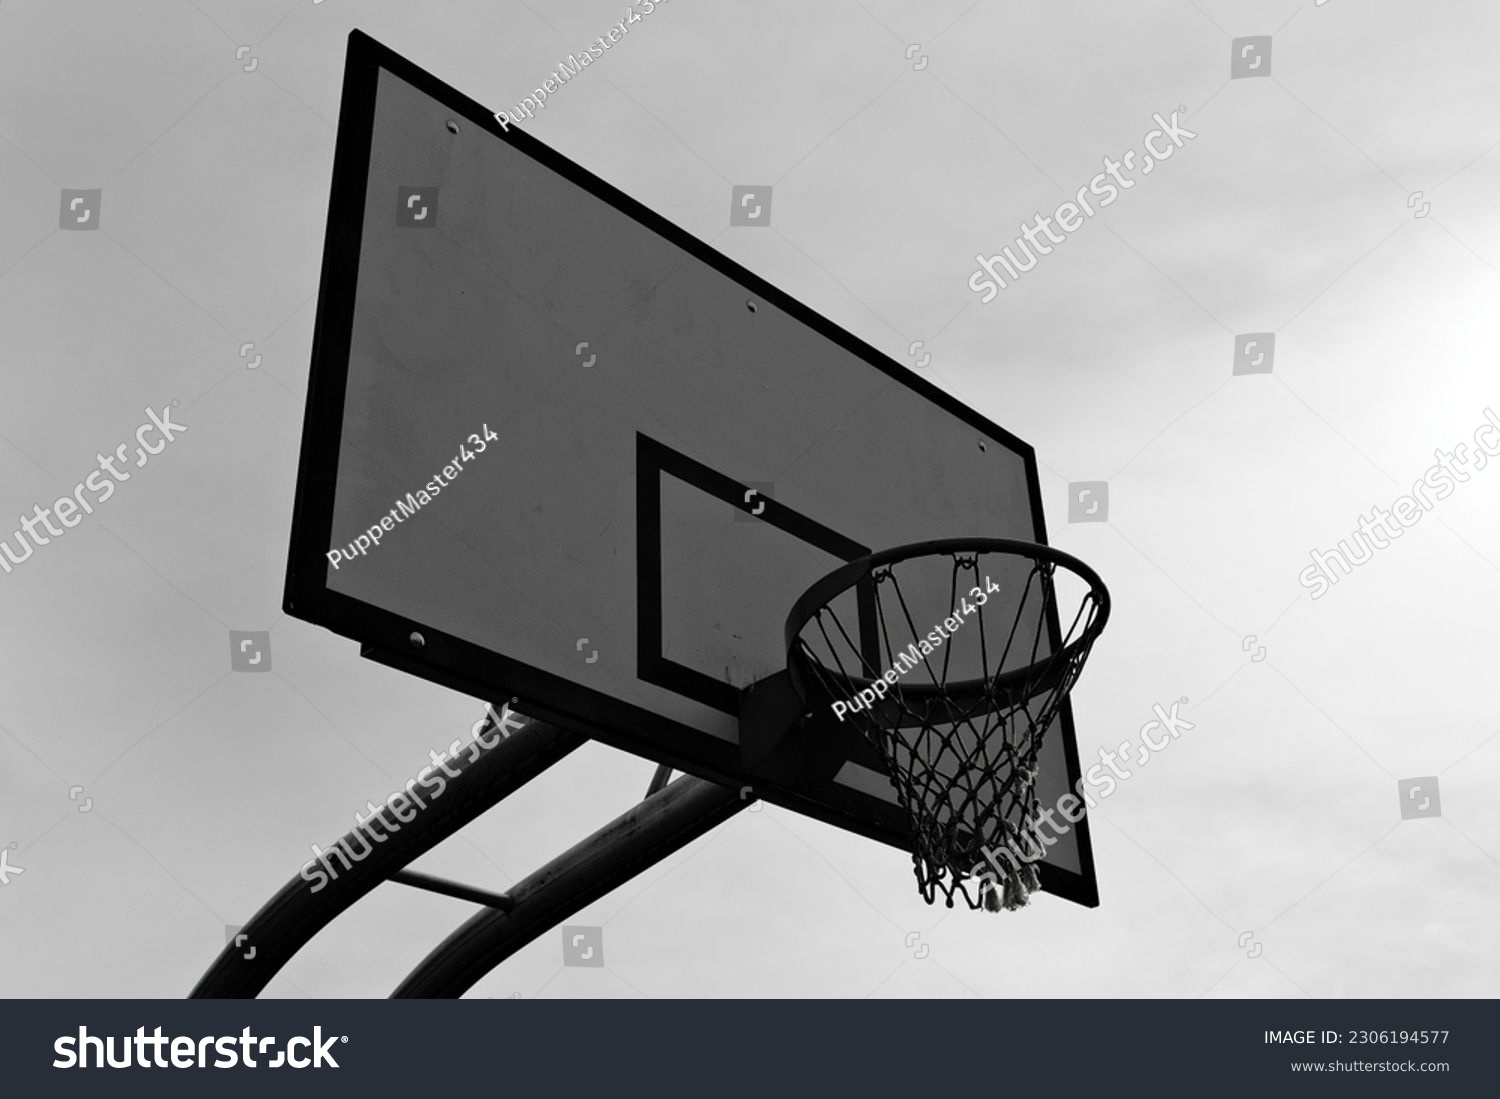 A basketball hoop, mounted on a backboard, providing a target for players to shoot the ball through, adding excitement and challenge to the game. #2306194577